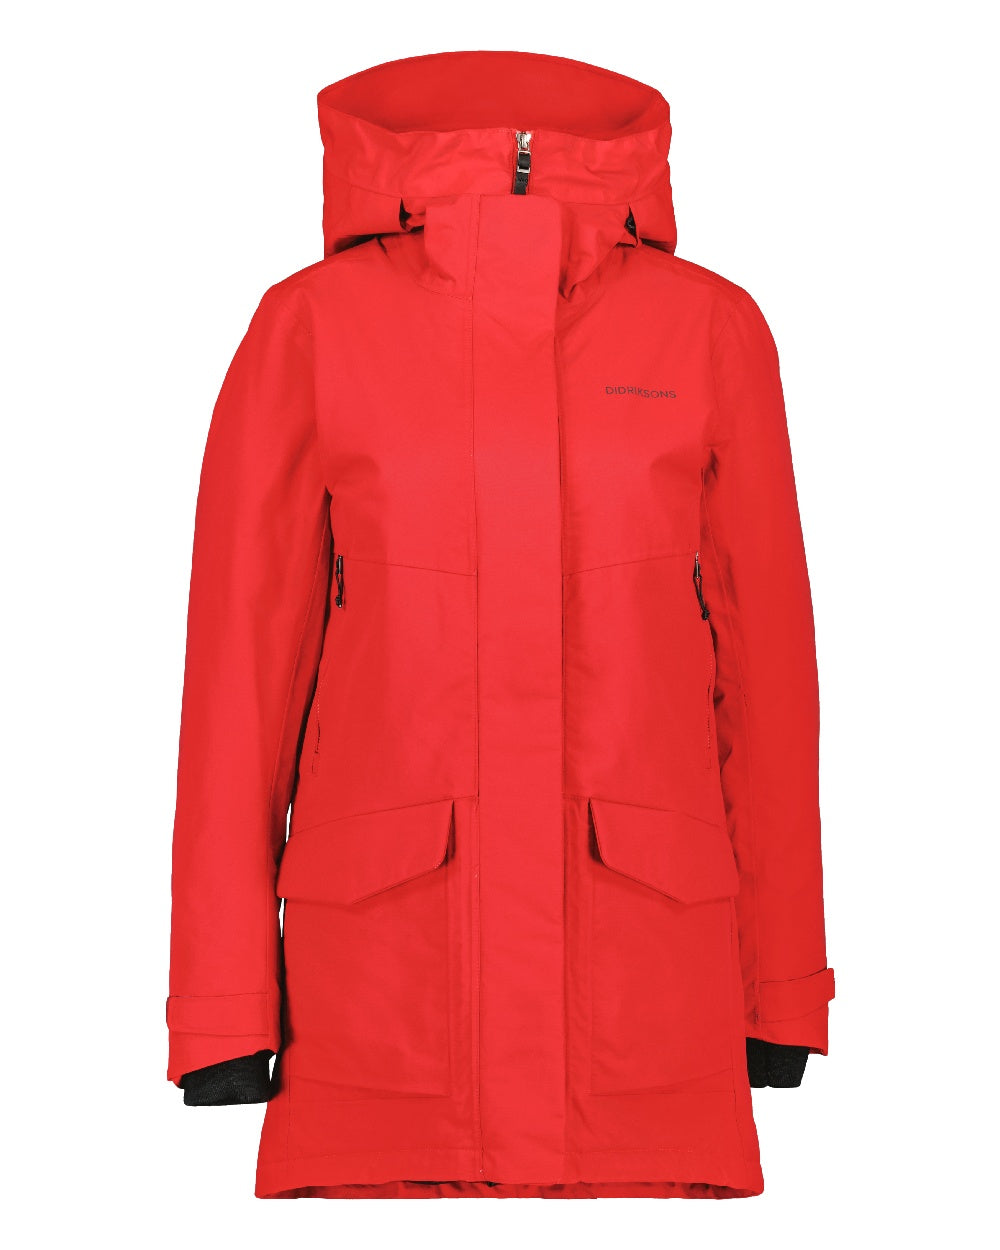 Didriksons Frida Womens Parka 7 in Pomme Red 